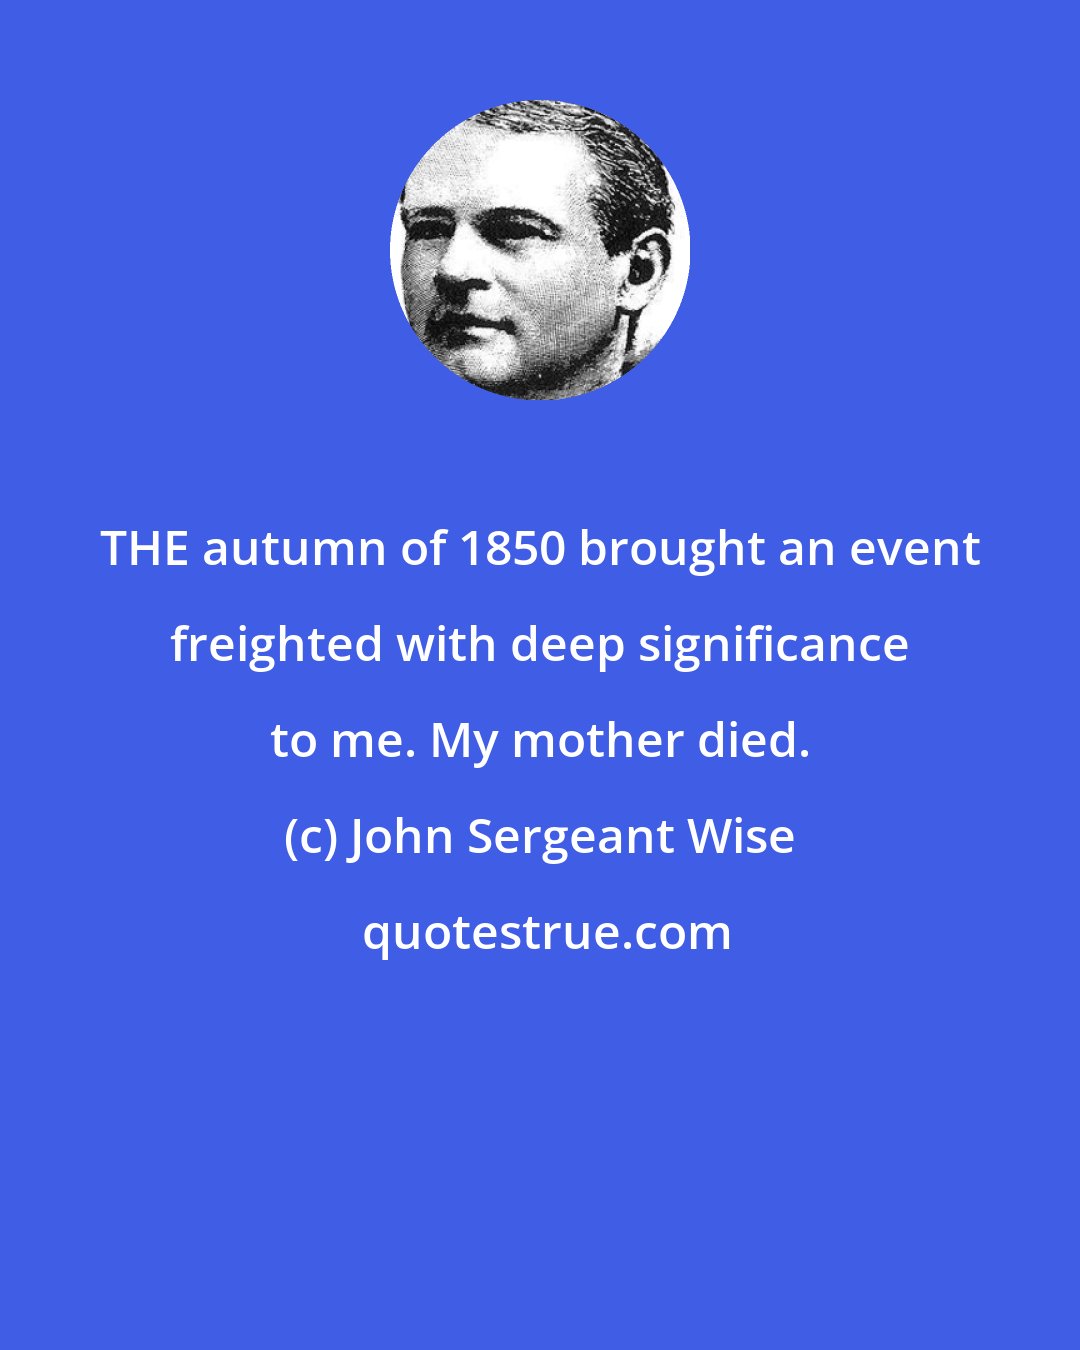 John Sergeant Wise: THE autumn of 1850 brought an event freighted with deep significance to me. My mother died.